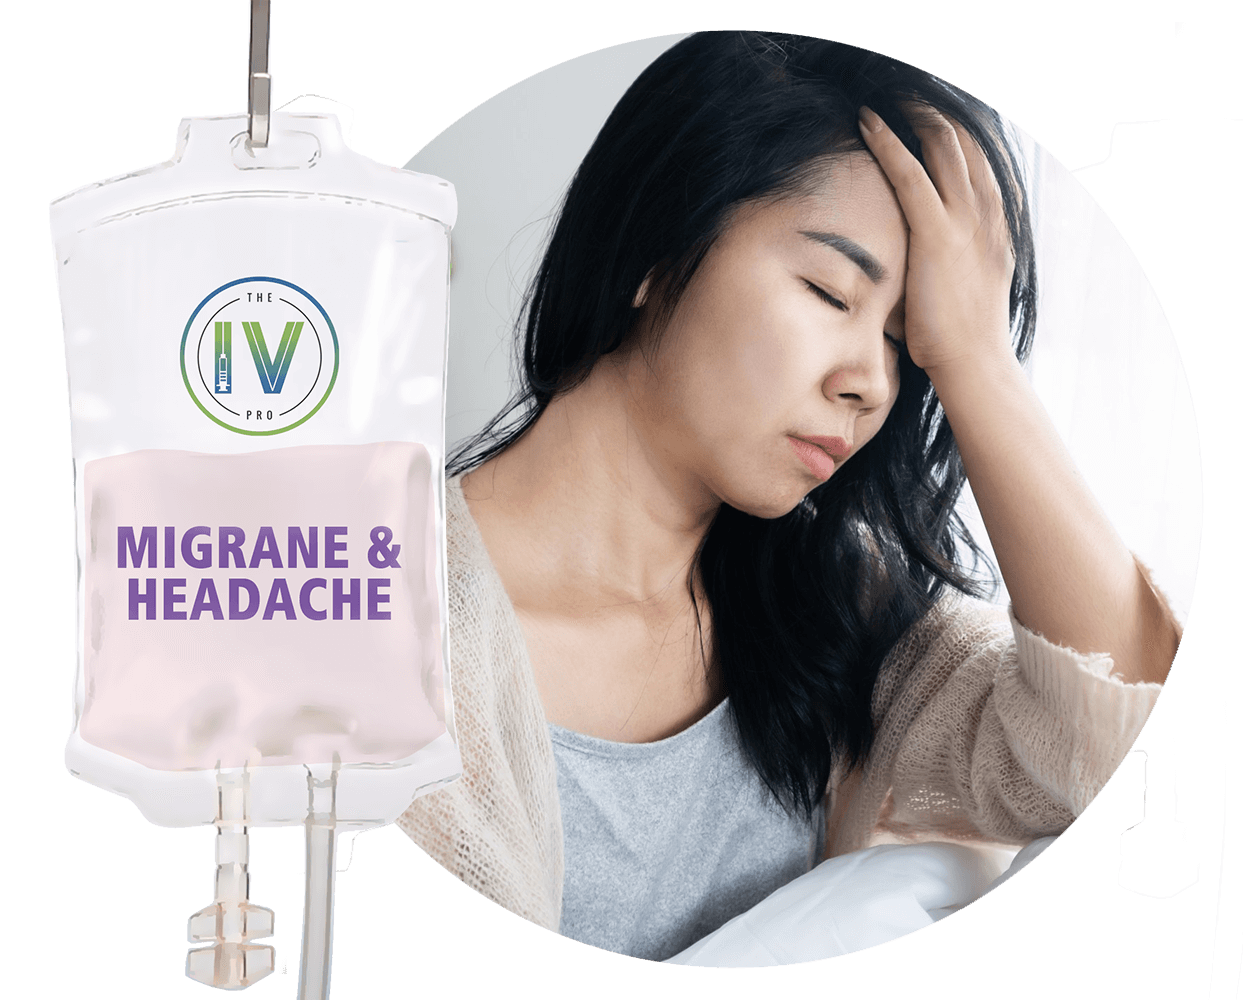 iv treatment for migraines